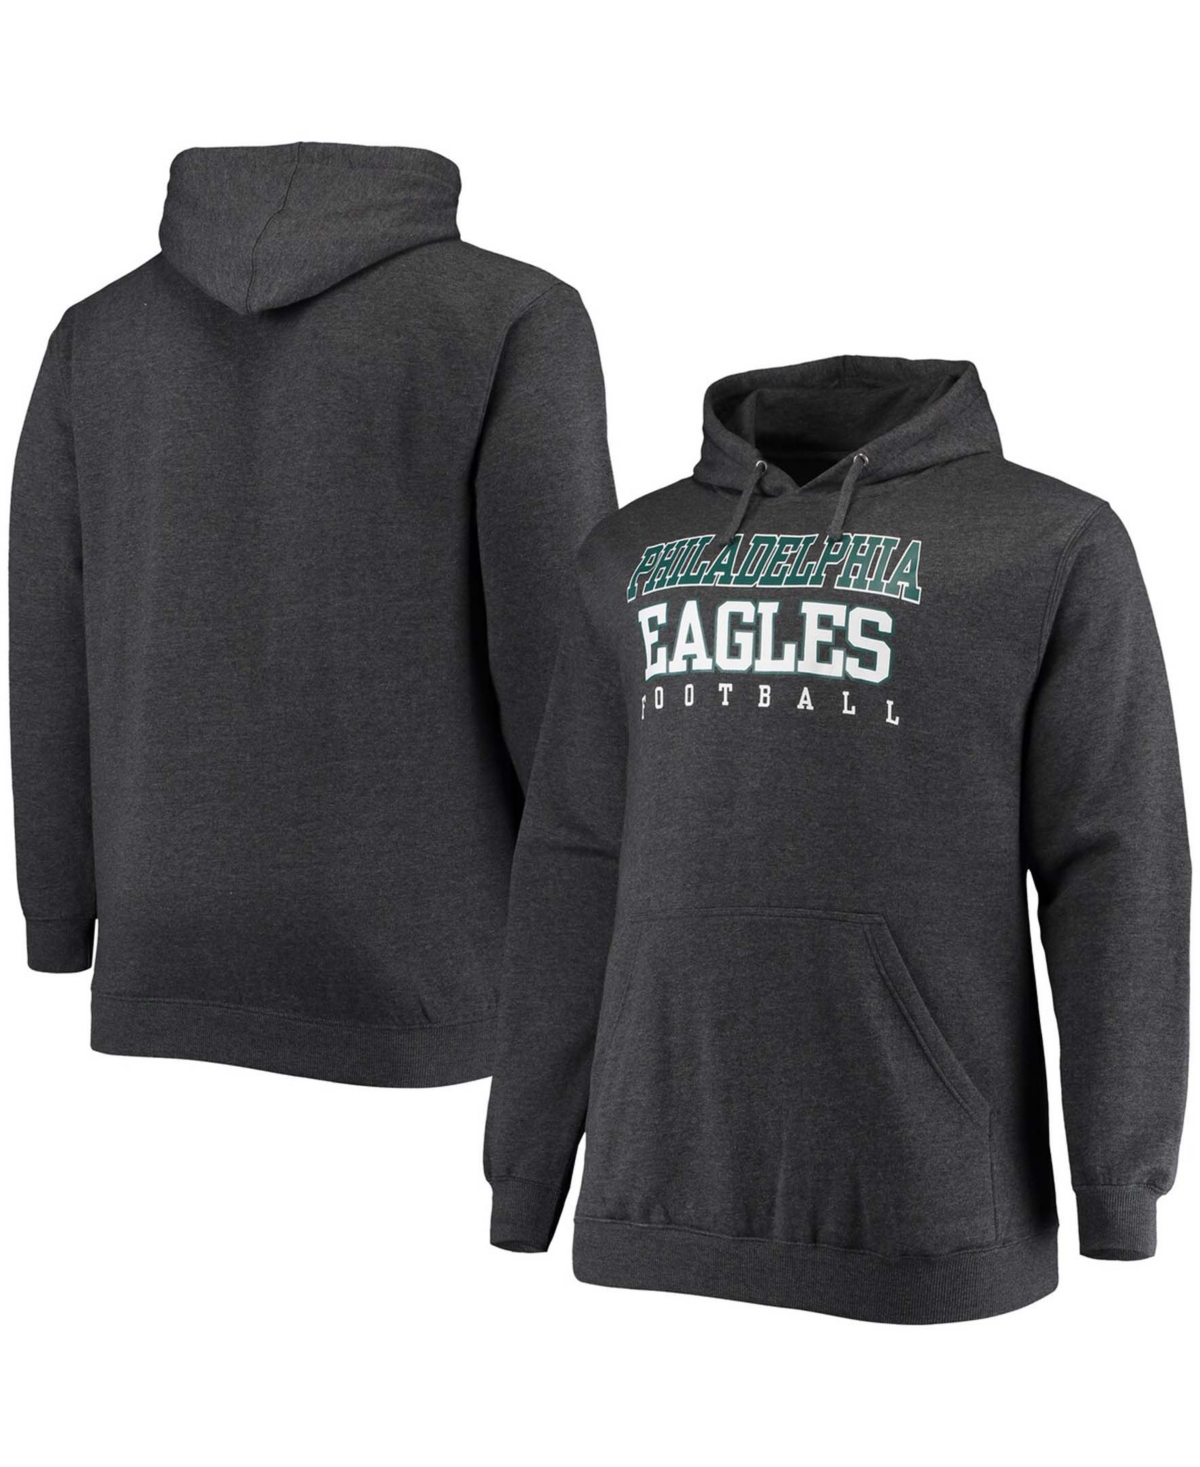 Shop Fanatics Men's Big And Tall Heathered Charcoal Philadelphia Eagles Practice Pullover Hoodie